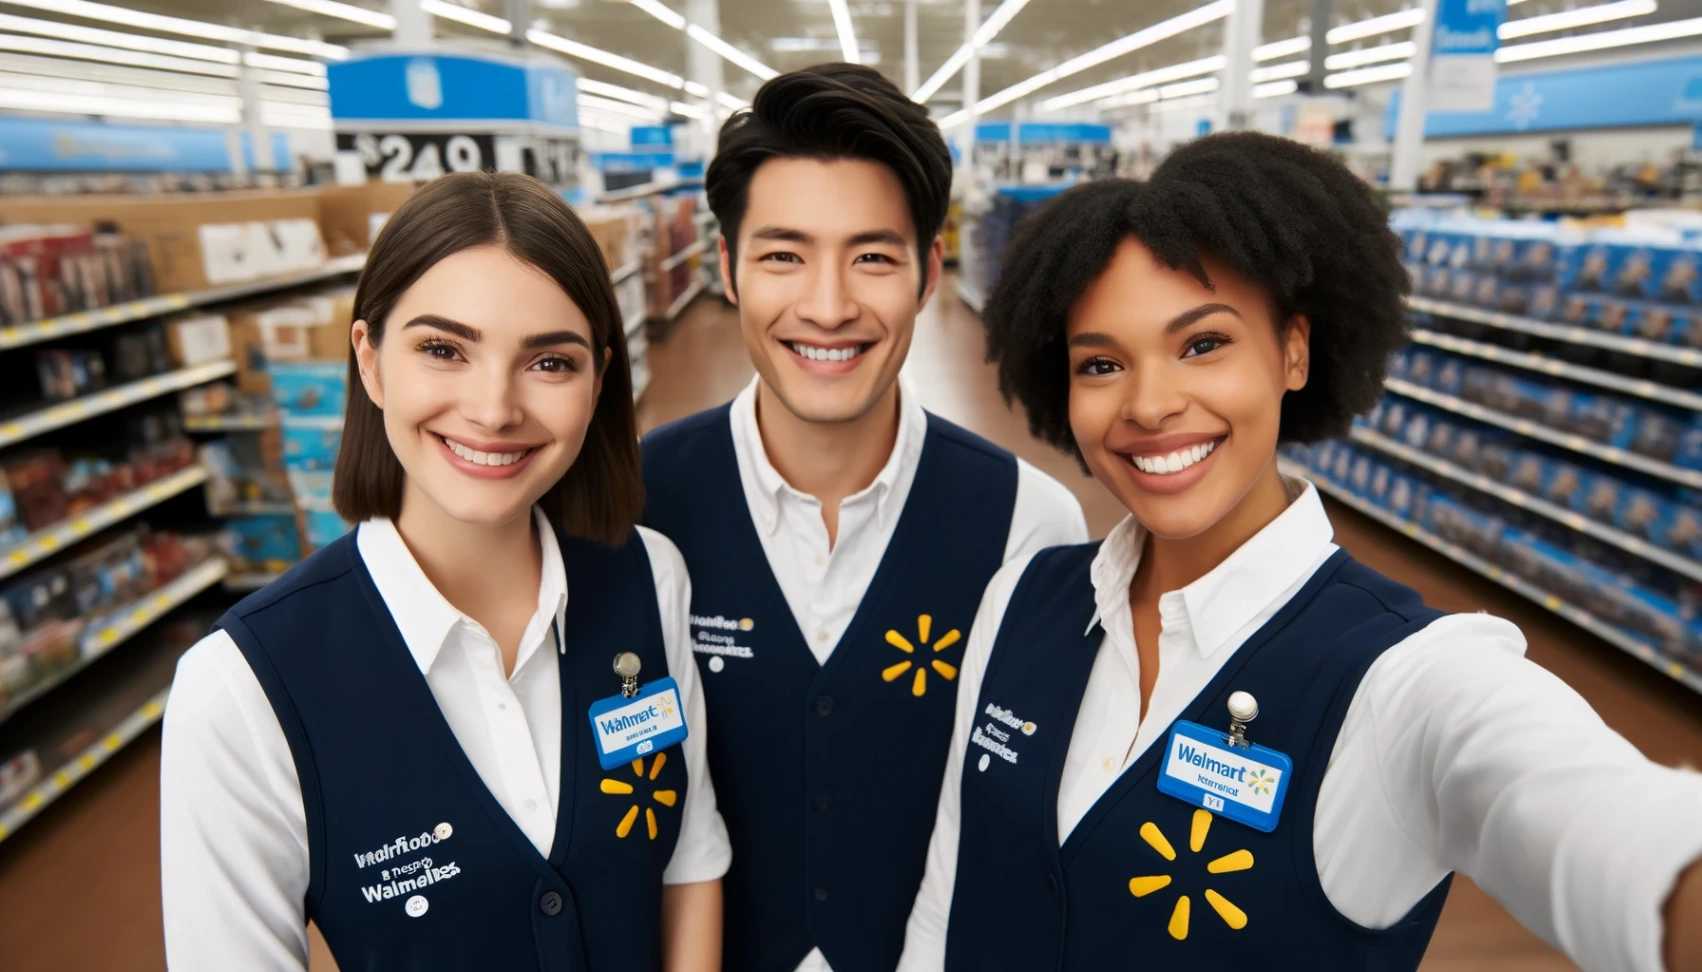 Walmart Careers: Step-by-Step to Your Successful Application